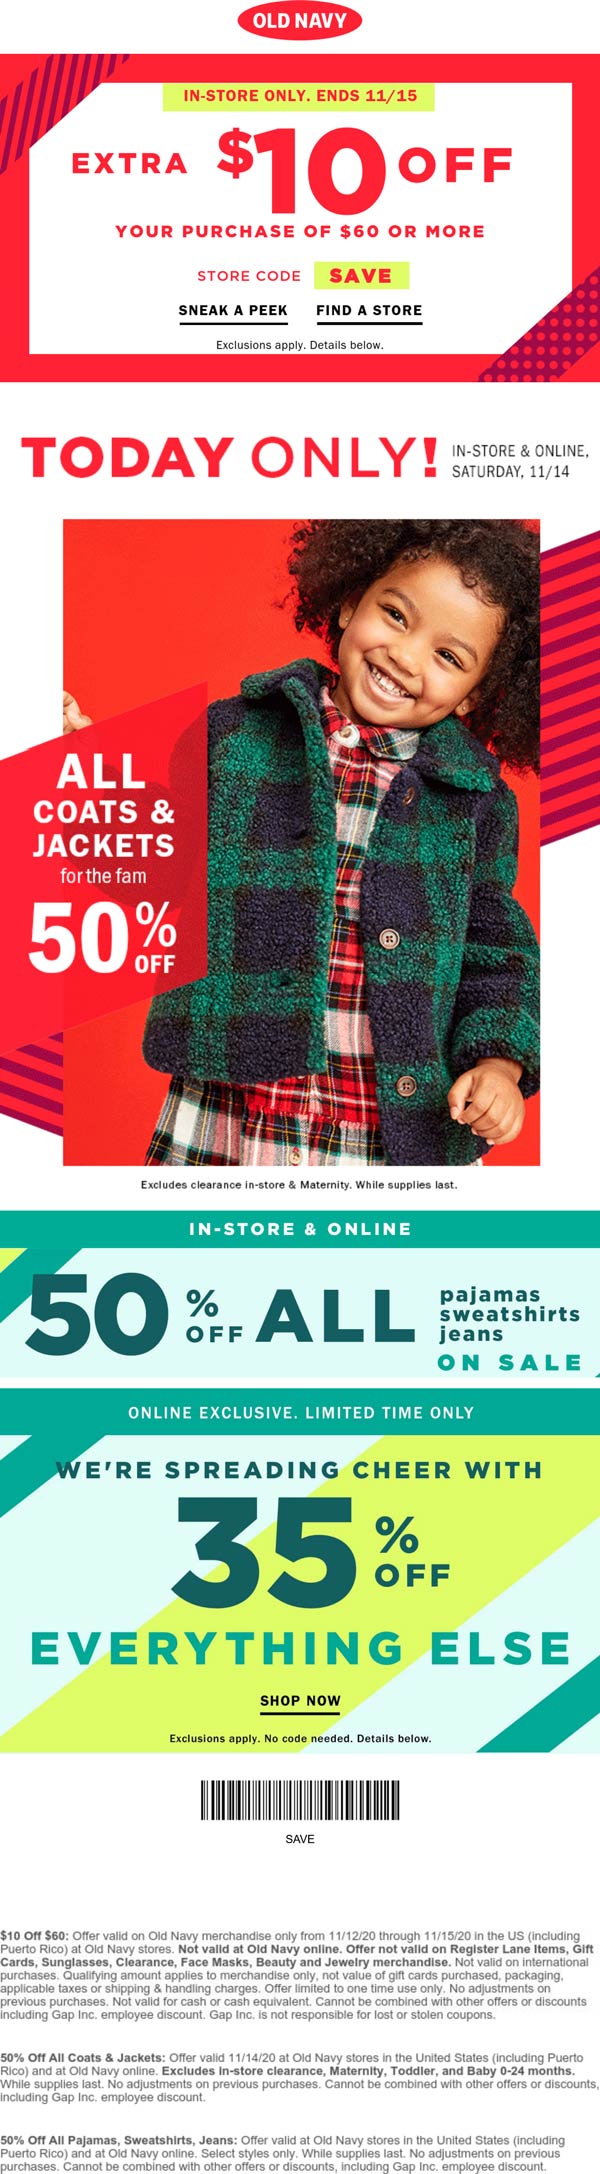 10 off 60 & more at Old Navy, or 35 off everything online oldnavy